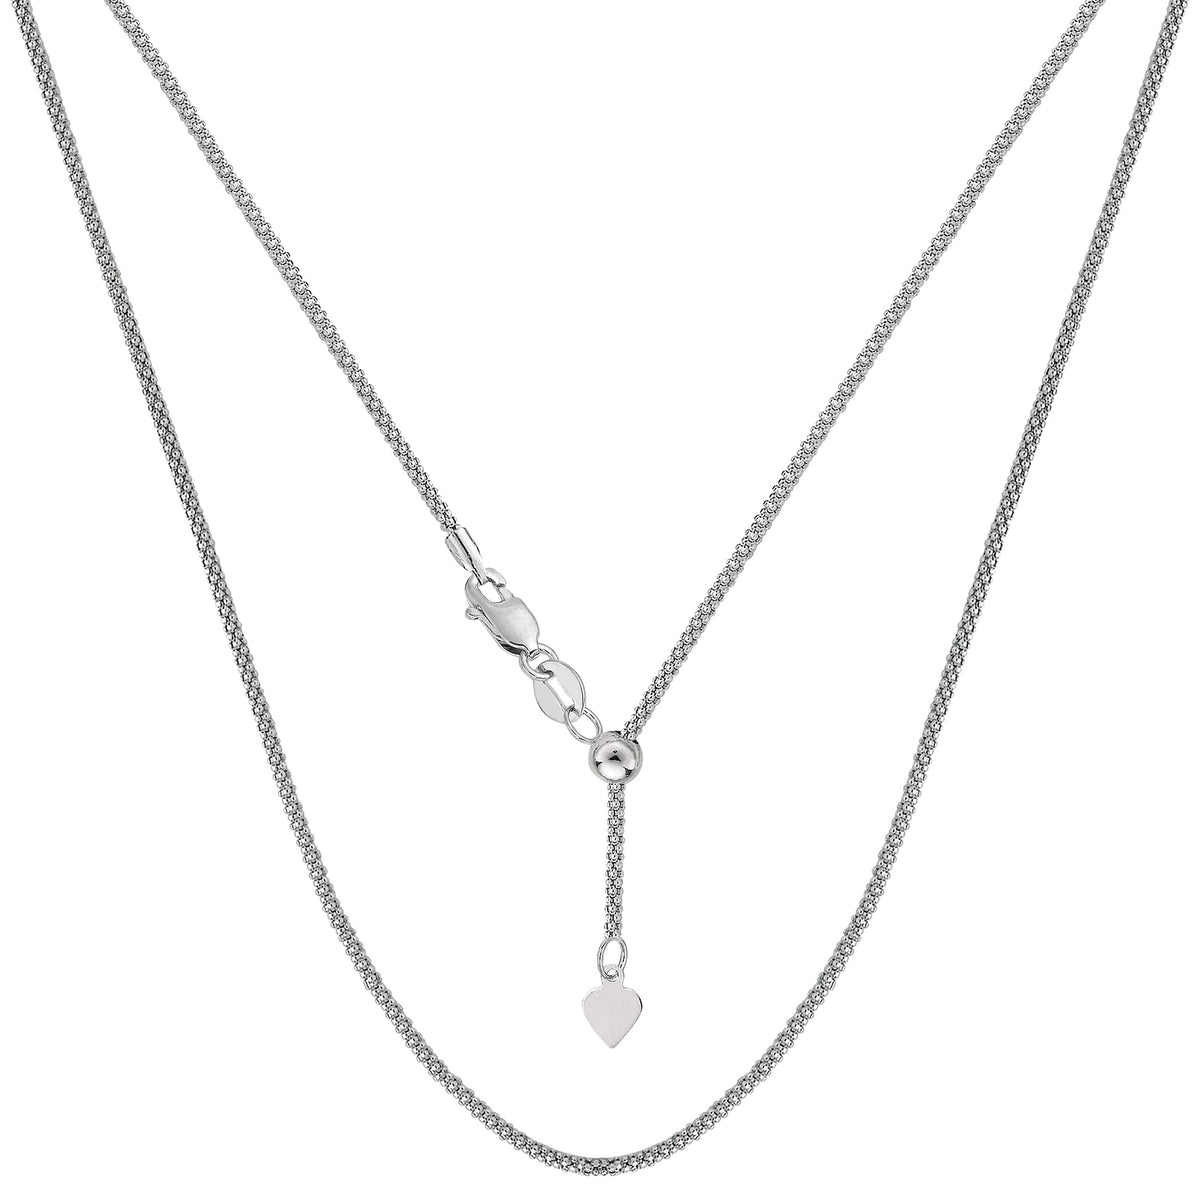 Sterling Silver Rhodium Plated 22" Sliding Adjustable Popcorn Chain Necklace, 1.5mm fine designer jewelry for men and women